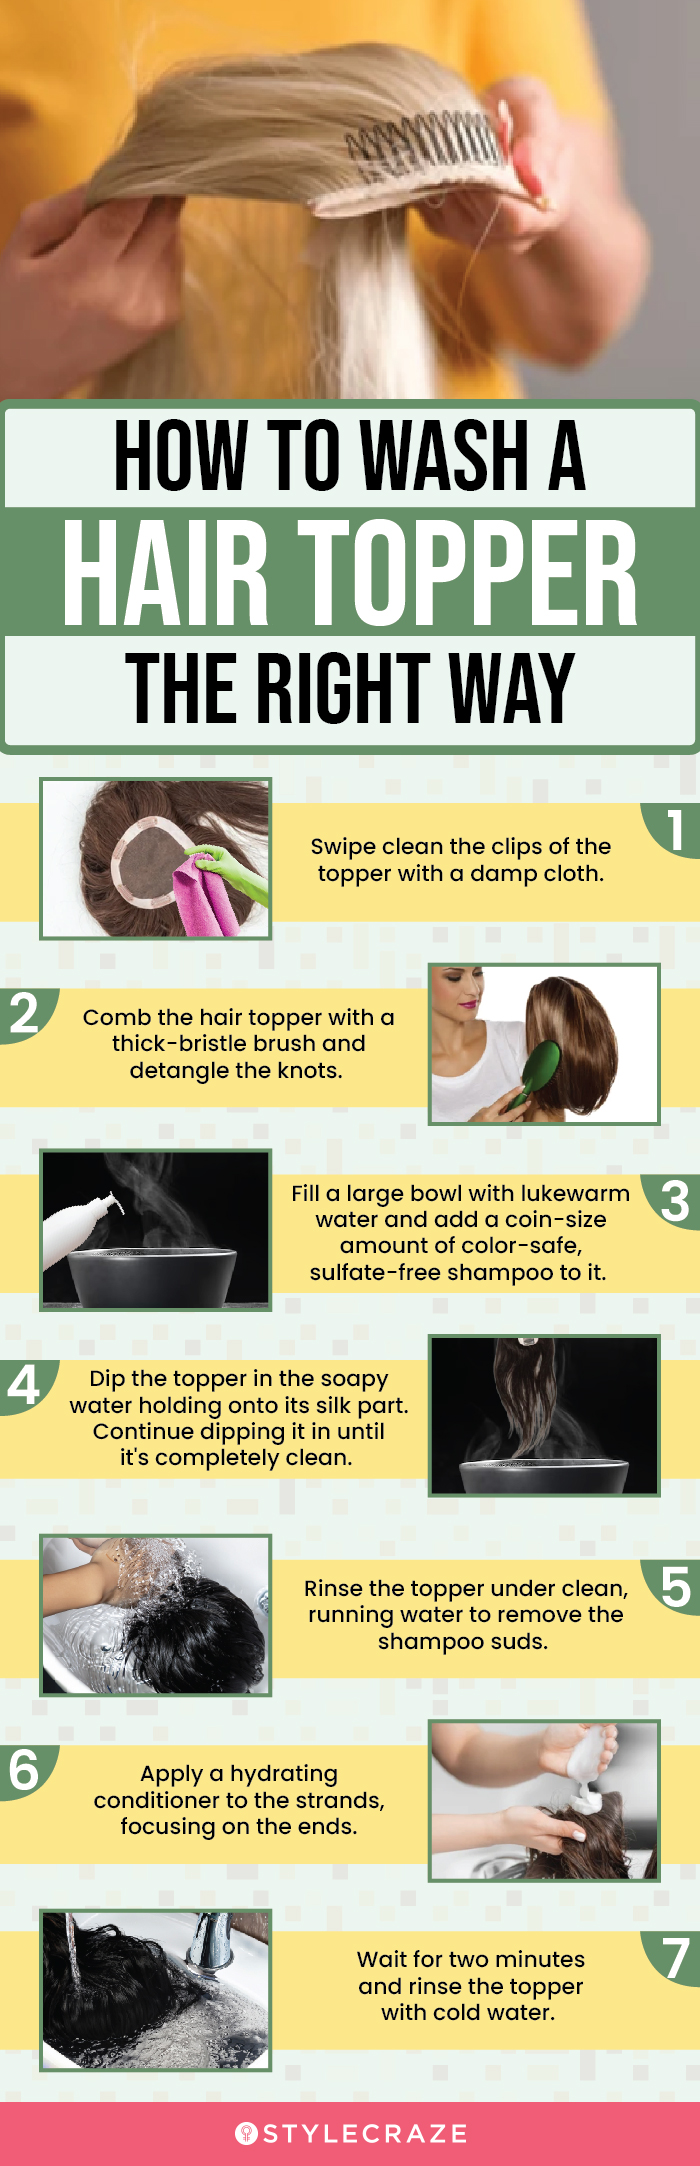 How To Wash A Hair Topper The Right Way (infographic)